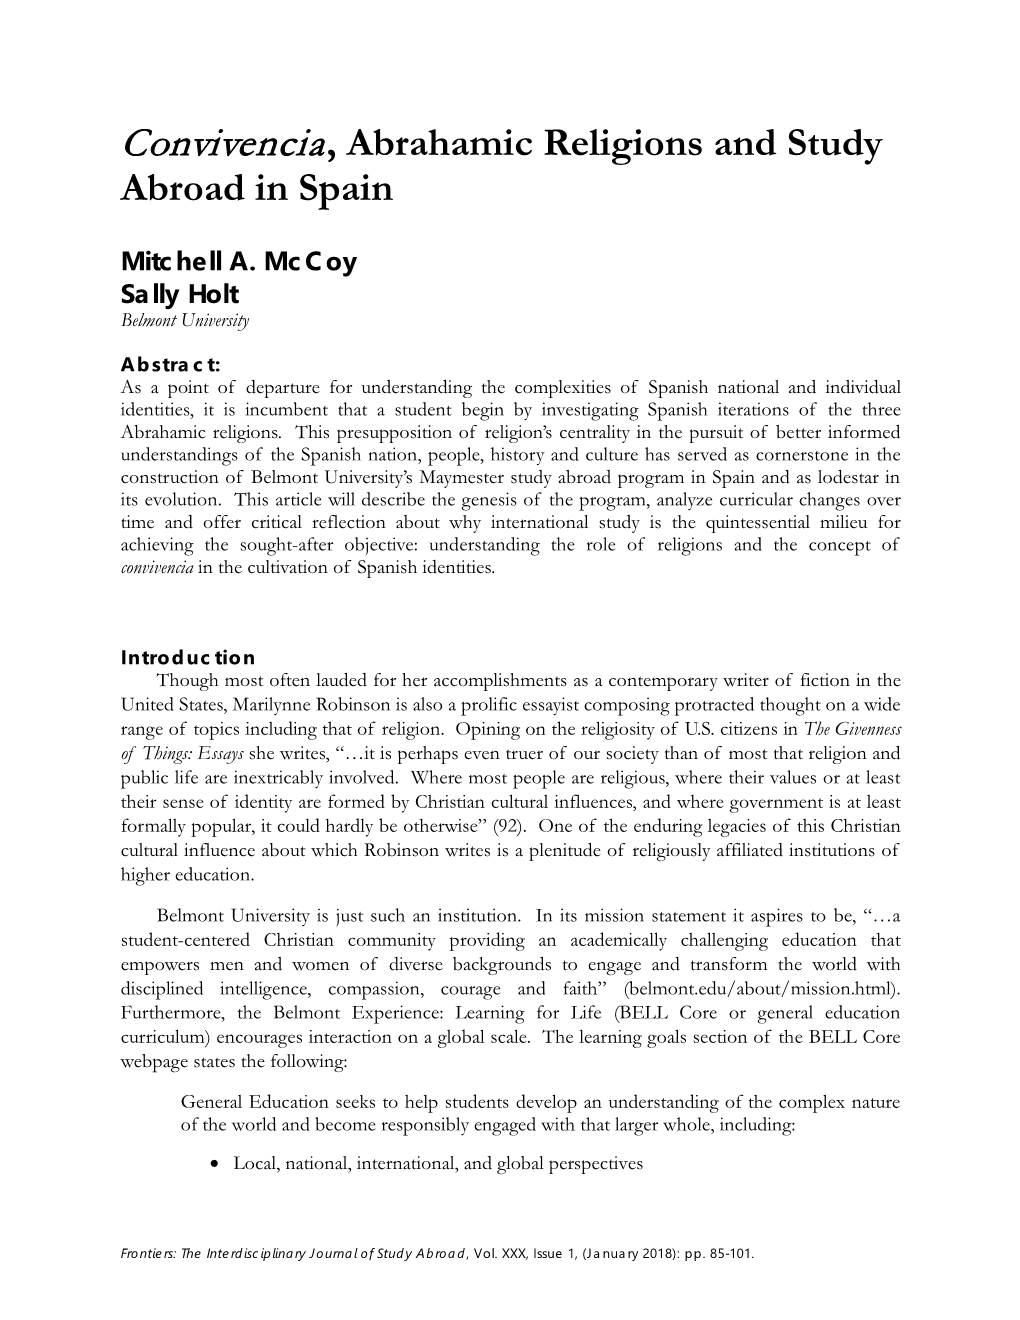 Convivencia, Abrahamic Religions and Study Abroad in Spain